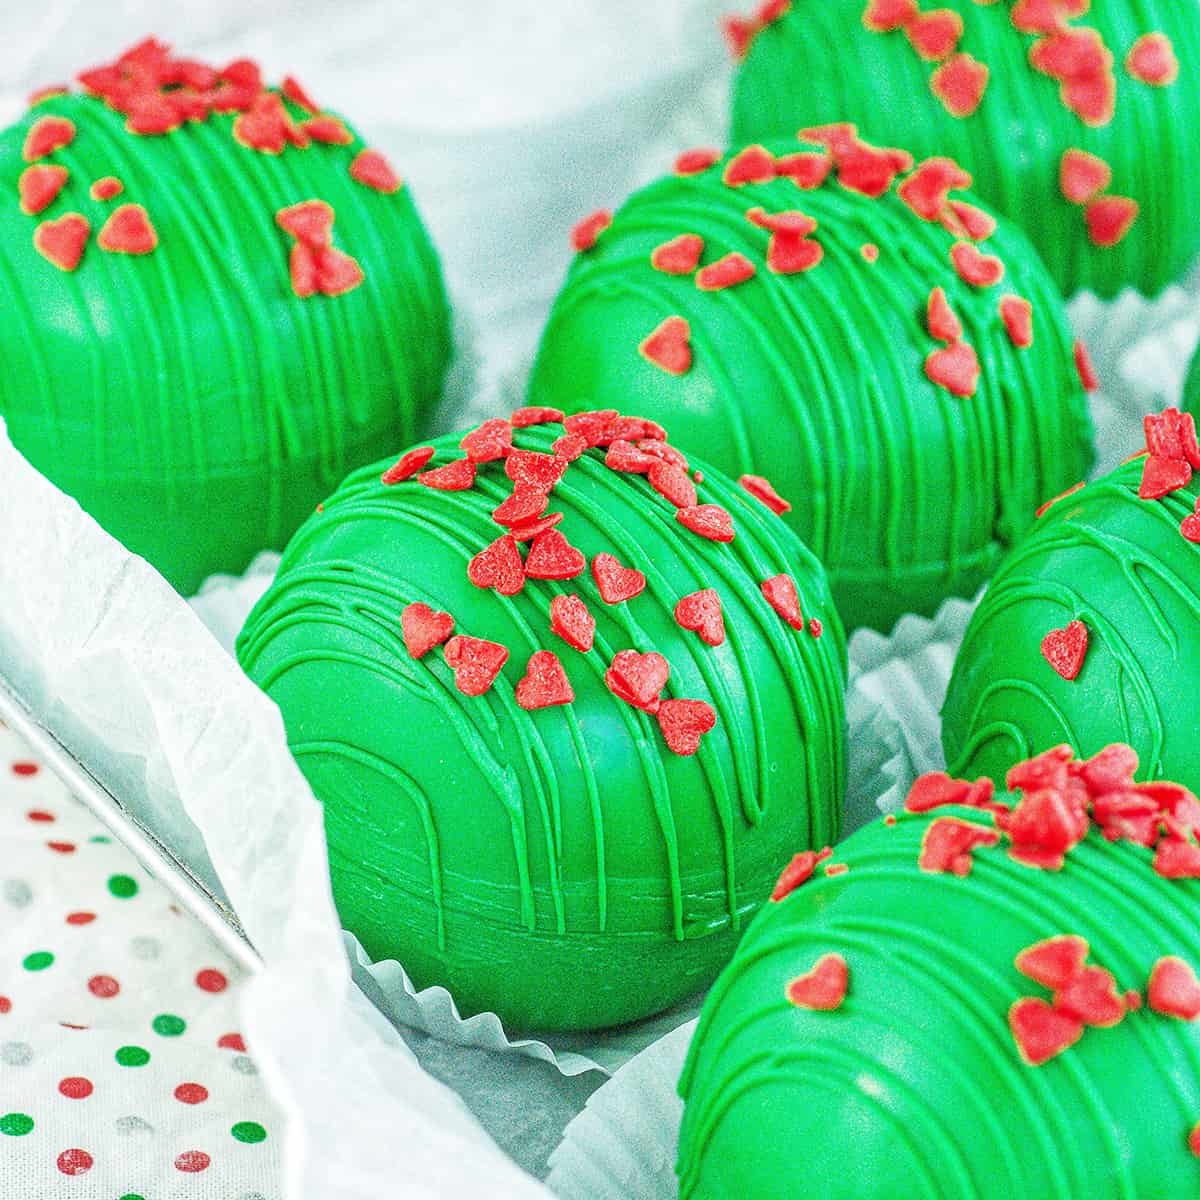 several bright green Grinch hot chocolate bombs with red heart sprinkles.